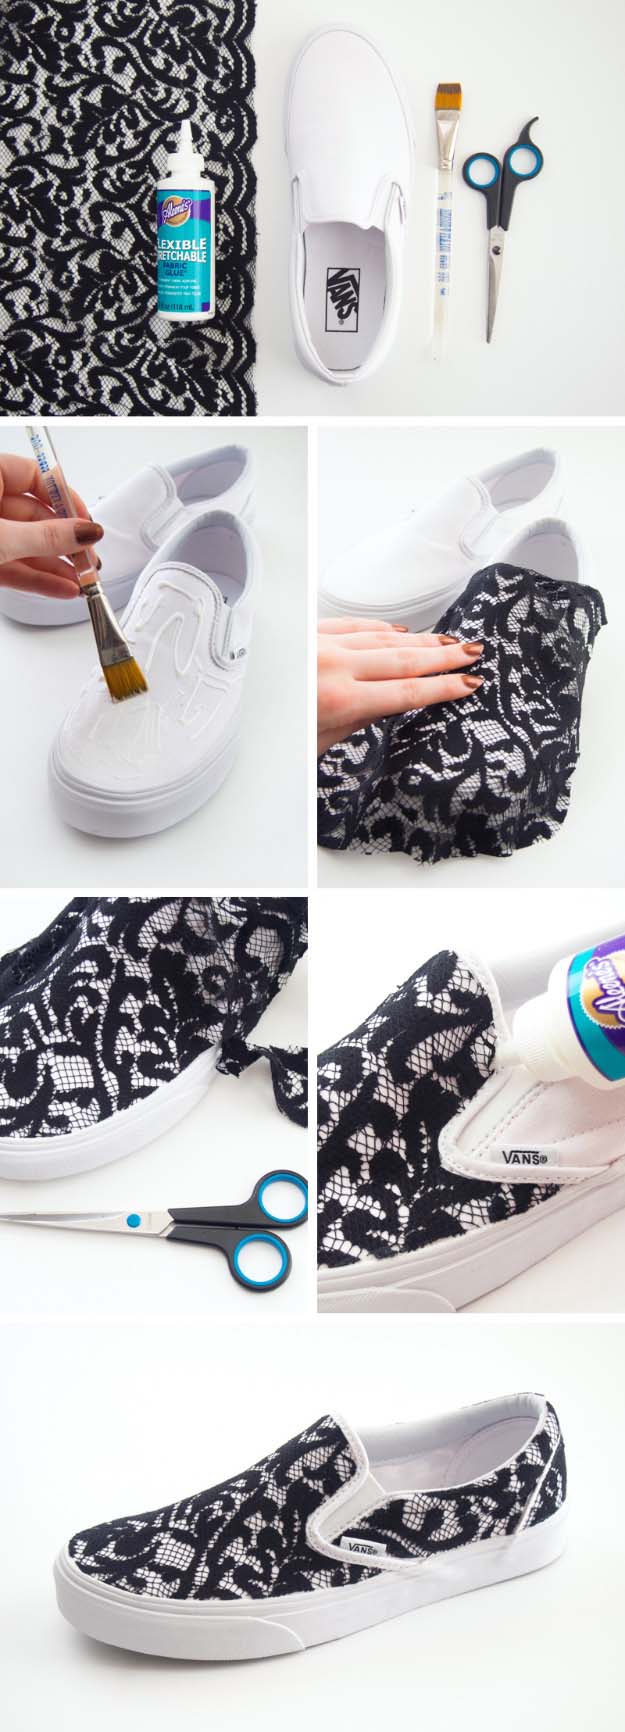 Cool DIY Fashion Ideas | Fun Do It Yourself Fashion projects | Learn how to refashion and sew jeans, T-shirts, skirts, and more | Lace Slip-on Sneakers #diyideas #diyclothes #teencrafts